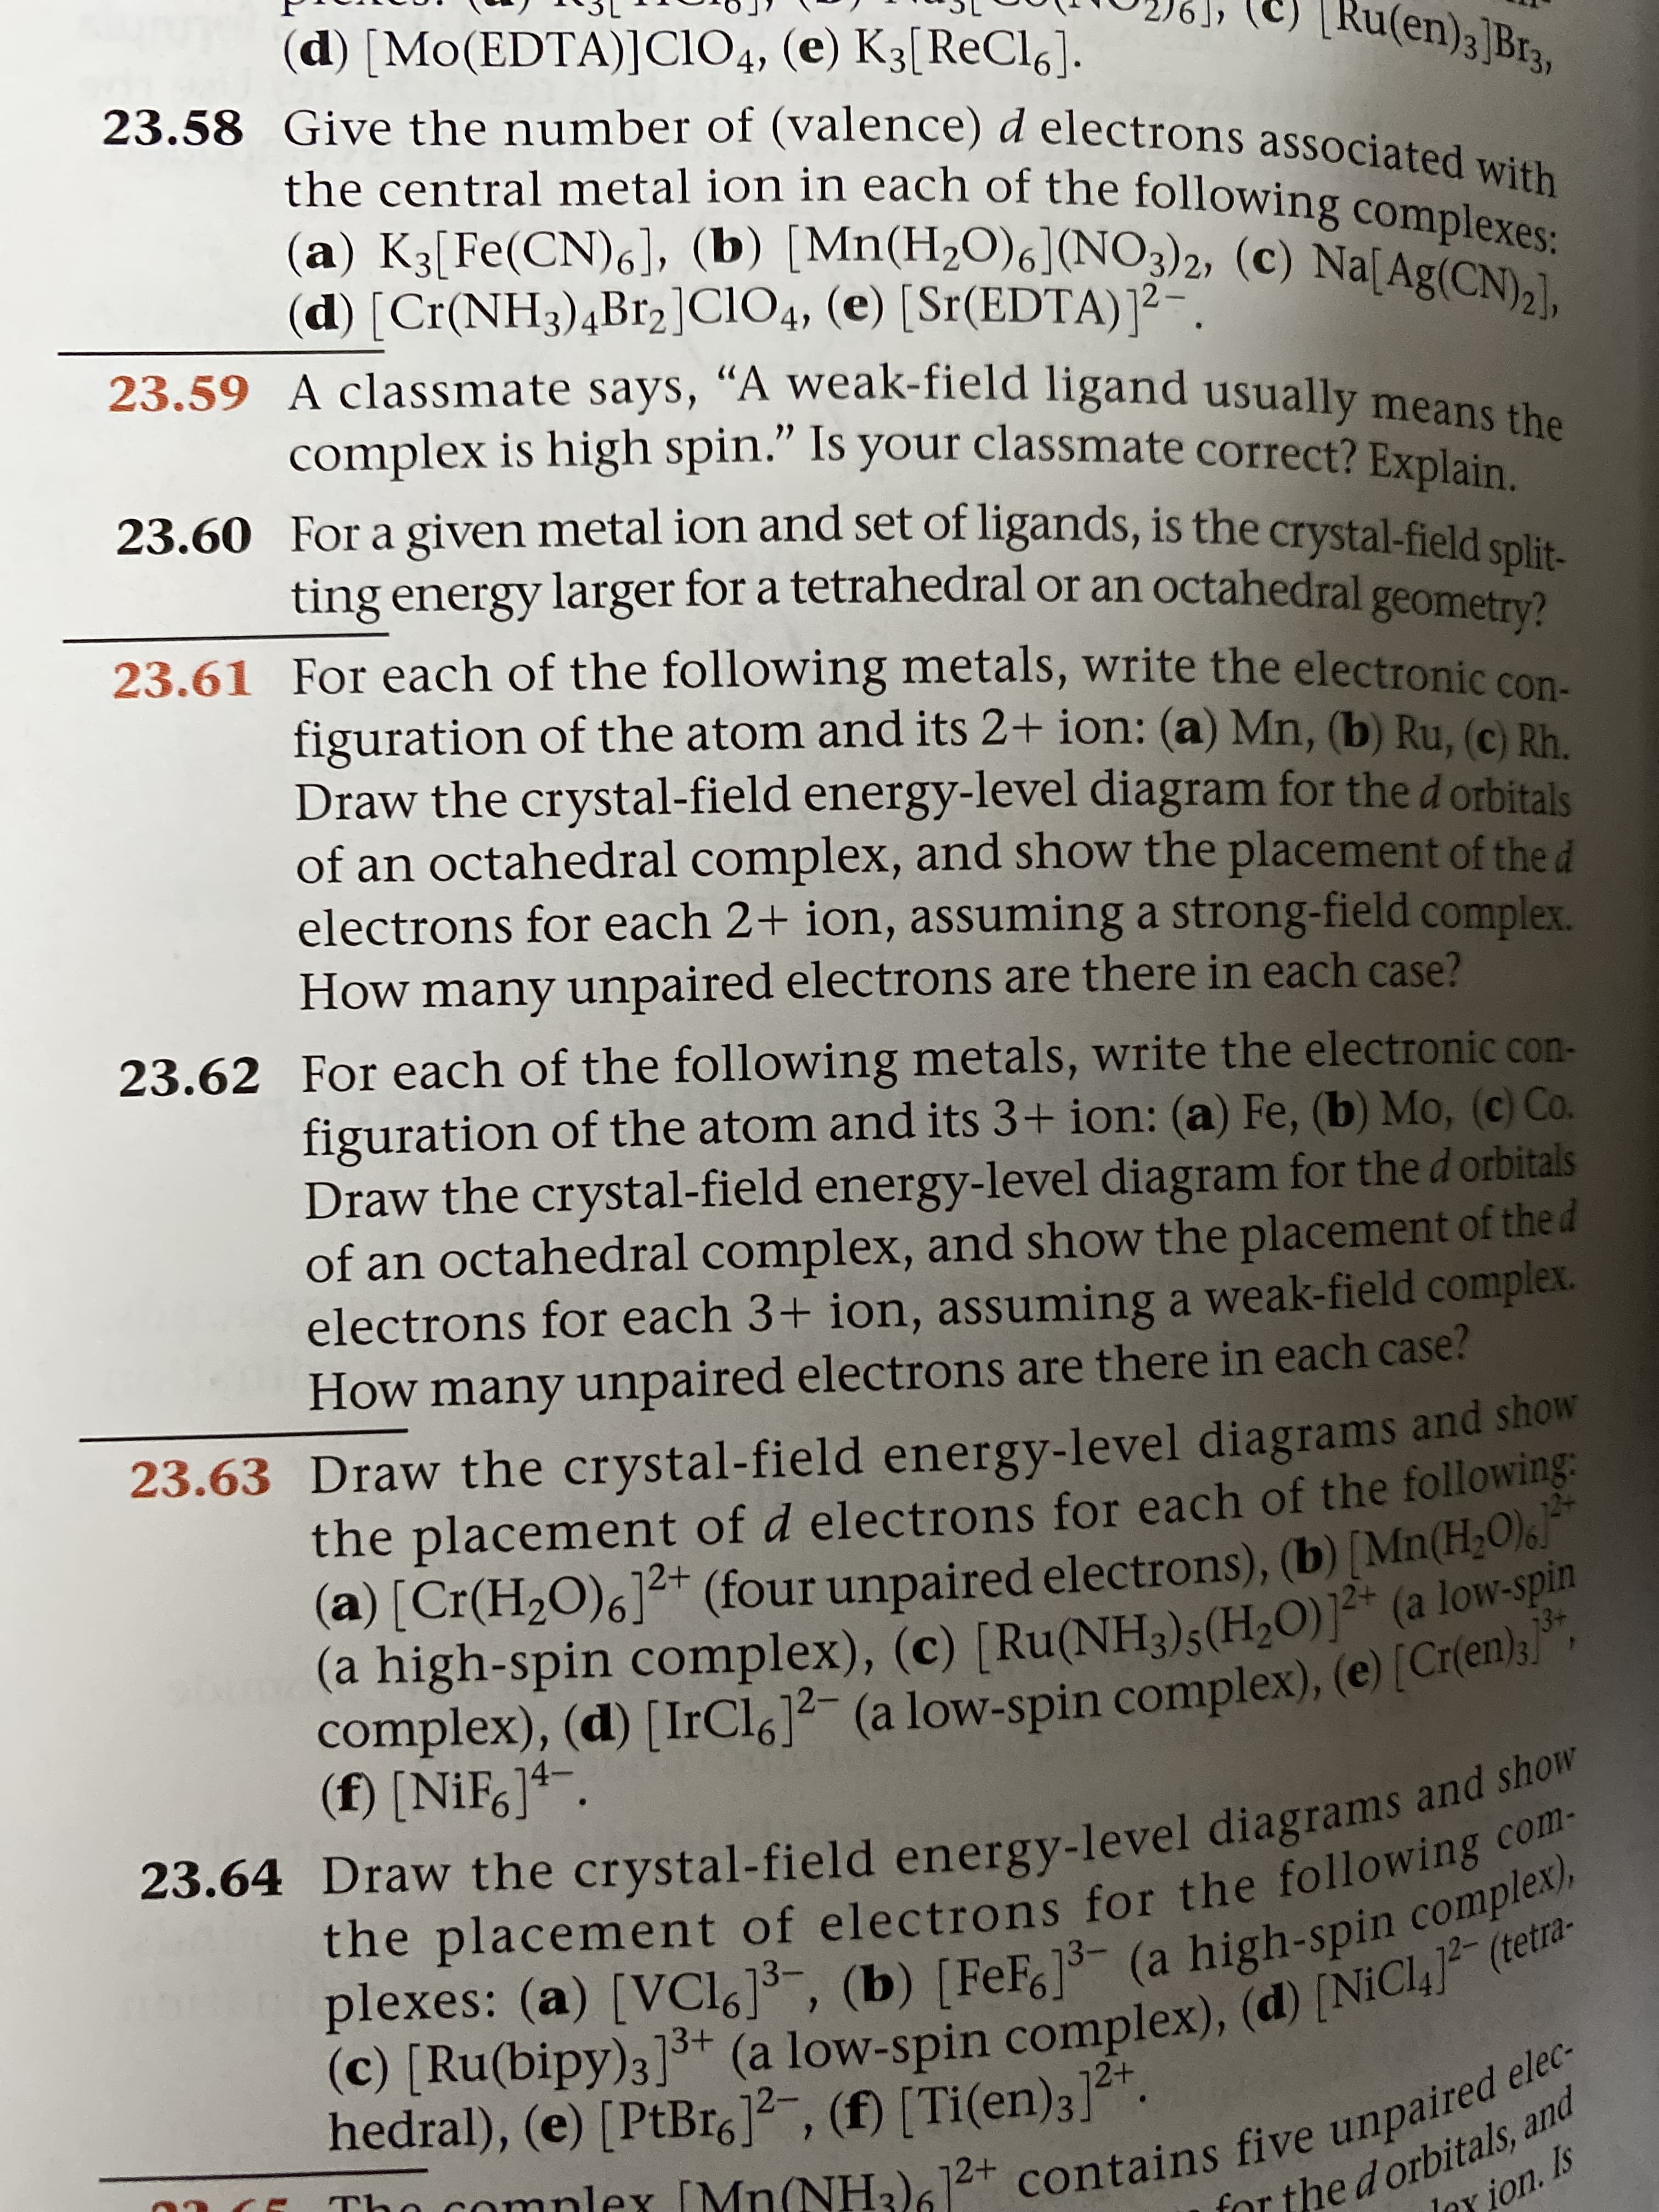 (d) [Mo(EDTA)]CIO4, (e) K3[ReCl6].
23.58 Give the number of (valence) d electrons associated with
the central metal ion in each of the following complexes:
(a) K3[Fe(CN),], (b) [Mn(H2O)6](NO3)2, (c) Na[Ag(CN)2),
(d) [Cr(NH3)4B12]ClO4, (e) [Sr(EDTA)]²-.
23.59 A classmate says, "A weak-field ligand usually means the
complex is high spin." Is your classmate correct? Explain
23.60 For a given metal ion and set of ligands, is the crystal-field split
ting energy larger for a tetrahedral or an octahedral geometry?
23.61 For each of the following metals, write the electronic con.
figuration of the atom and its 2+ ion: (a) Mn, (b) Ru, (c) Rh
Draw the crystal-field energy-level diagram for the d orbitals
of an octahedral complex, and show the placement of the d
electrons for each 2+ ion, assuming a strong-field complex.
How many unpaired electrons are there in each case?
Ru(en)3]Br3,
23.62 For each of the following metals, write the electronic con-
figuration of the atom and its 3+ ion: (a) Fe, (b) Mo, (c) Co.
Draw the crystal-field energy-level diagram for the d orbitals
of an octahedral complex, and show the placement of the d
electrons for each 3+ ion, assuming a weak-field complex.
How many unpaired electrons are there in each case?
23.63 Draw the crystal-field energy-level diagrams and show
the placement of d electrons for each of the following:
(a) [Cr(H2O)6]2+ (four unpaired electrons), (b) [Mn(H2O)6!
(a high-spin complex), (c) [Ru(NH3)5(H2O)]²* (a low-spin
complex), (d) [IrCl6]2- (a low-spin complex), (e) [Cr(en);]*,
(f) [NiF6]*“.
23.64 Draw the crystal-field energy-level diagrams and show
the placement of electrons for the following com-
plexes: (a) [VC16]3, (b) [FeF6]- (a high-spin complex),
(c) [Ru(bipy)3]** (a low-spin complex), (d) [NiCl,]² (tetra-
2+
hedral), (e) [PtBro]2-, (f) [Ti(en)3].
01 CE Tho complex [Mn(NH3)612+ contains five unpaired elec-
for the d orbitals, and
Iny ion. Is
